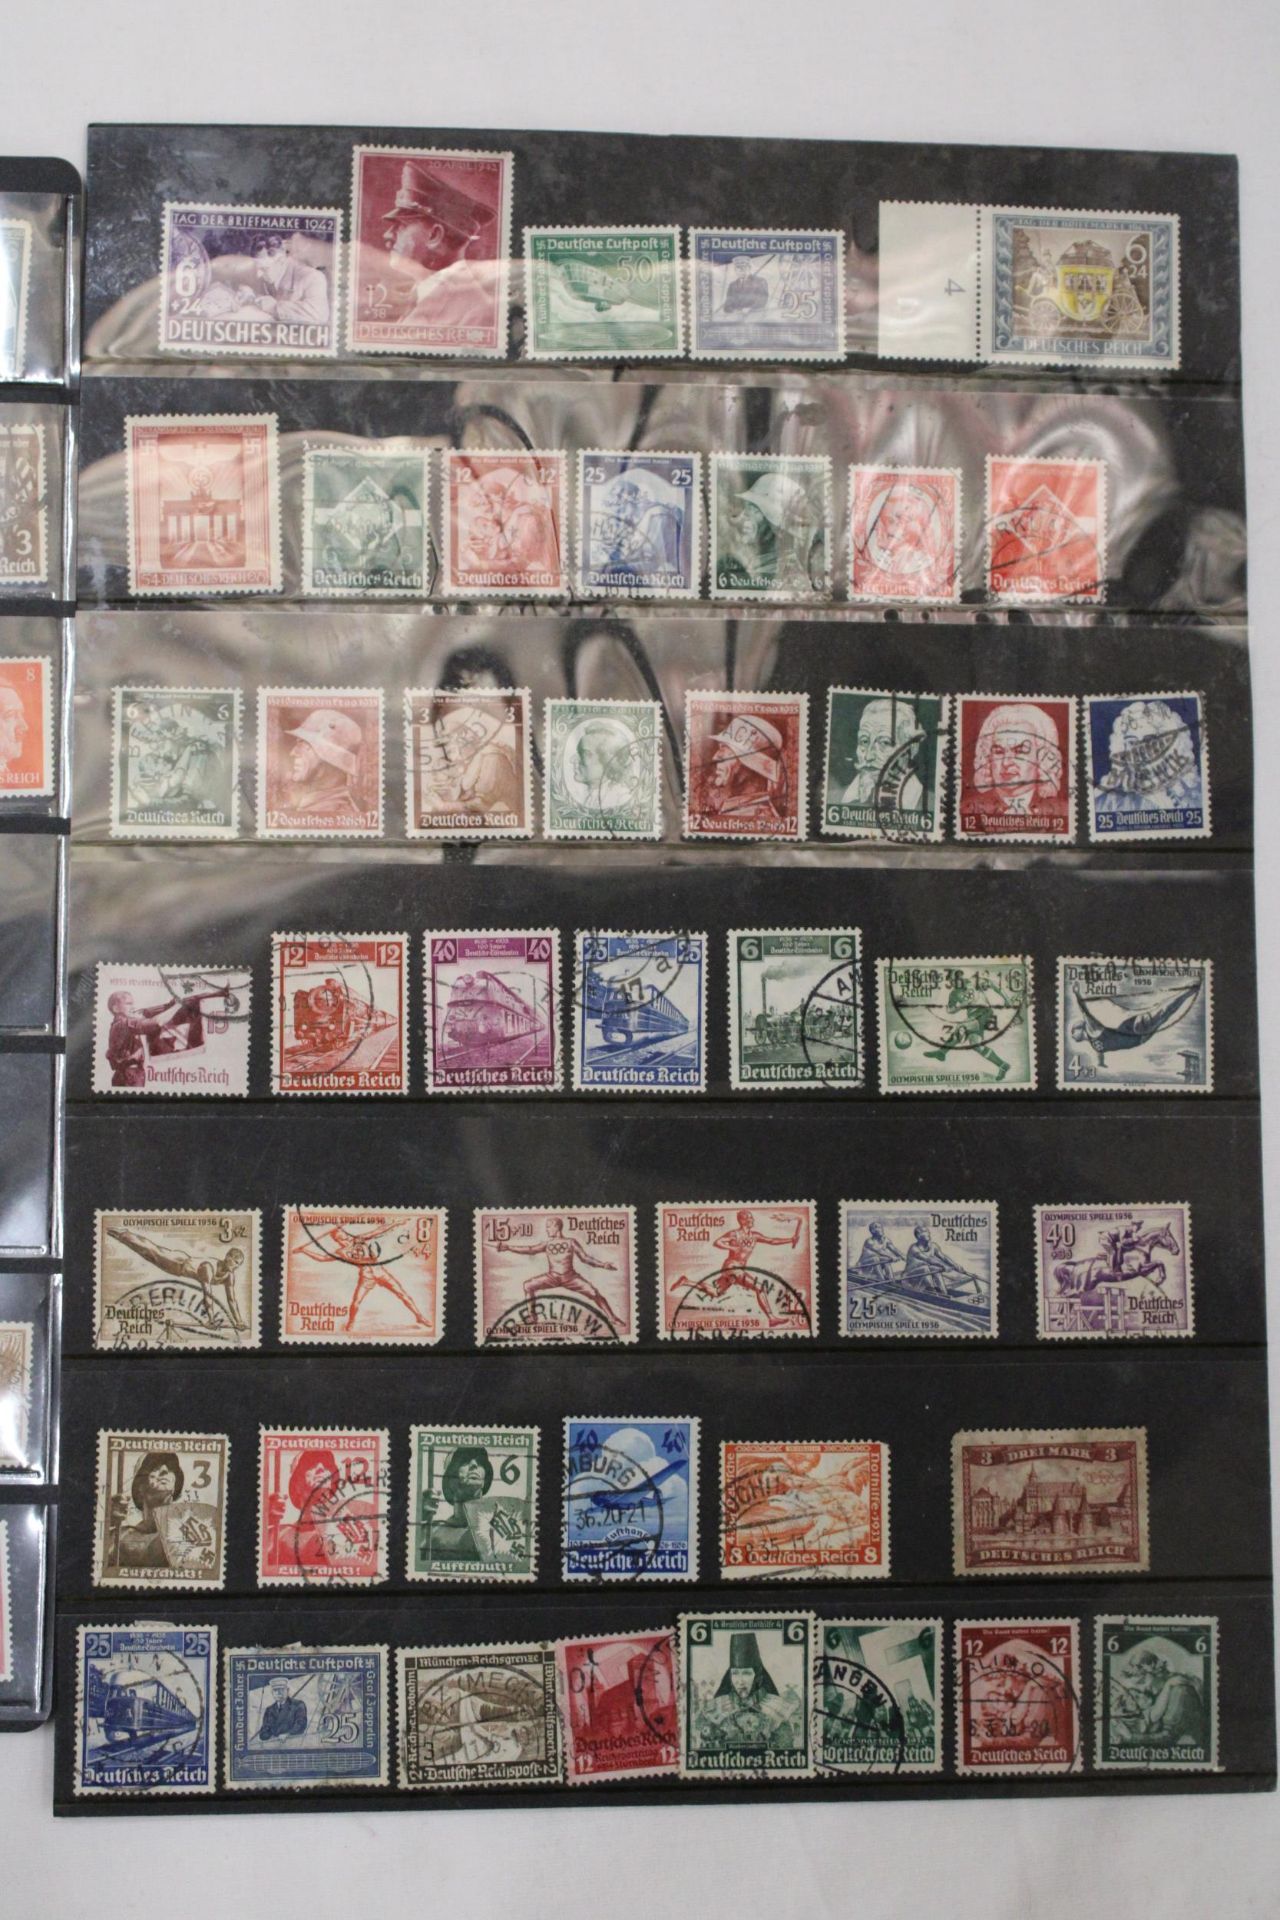 A COLLECTION OF GERMAN 3RD RANK HITLER STAMPS (2 PAGES) - Image 4 of 4